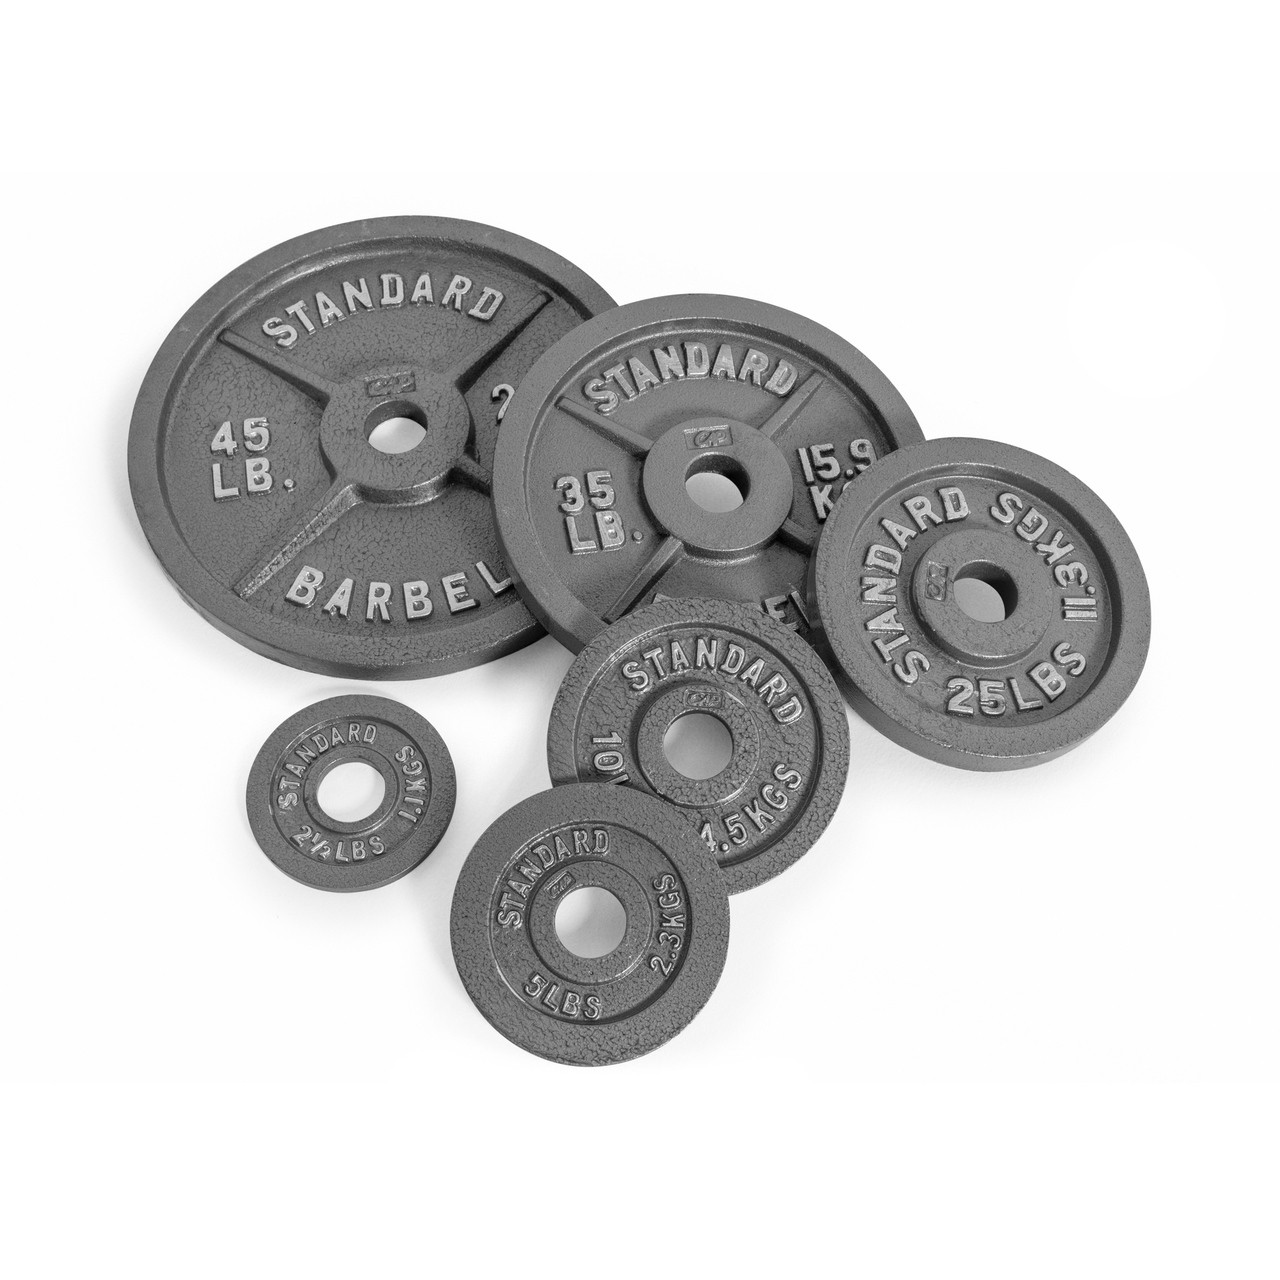 CAP Barbell Olympic Weight Plates Sets